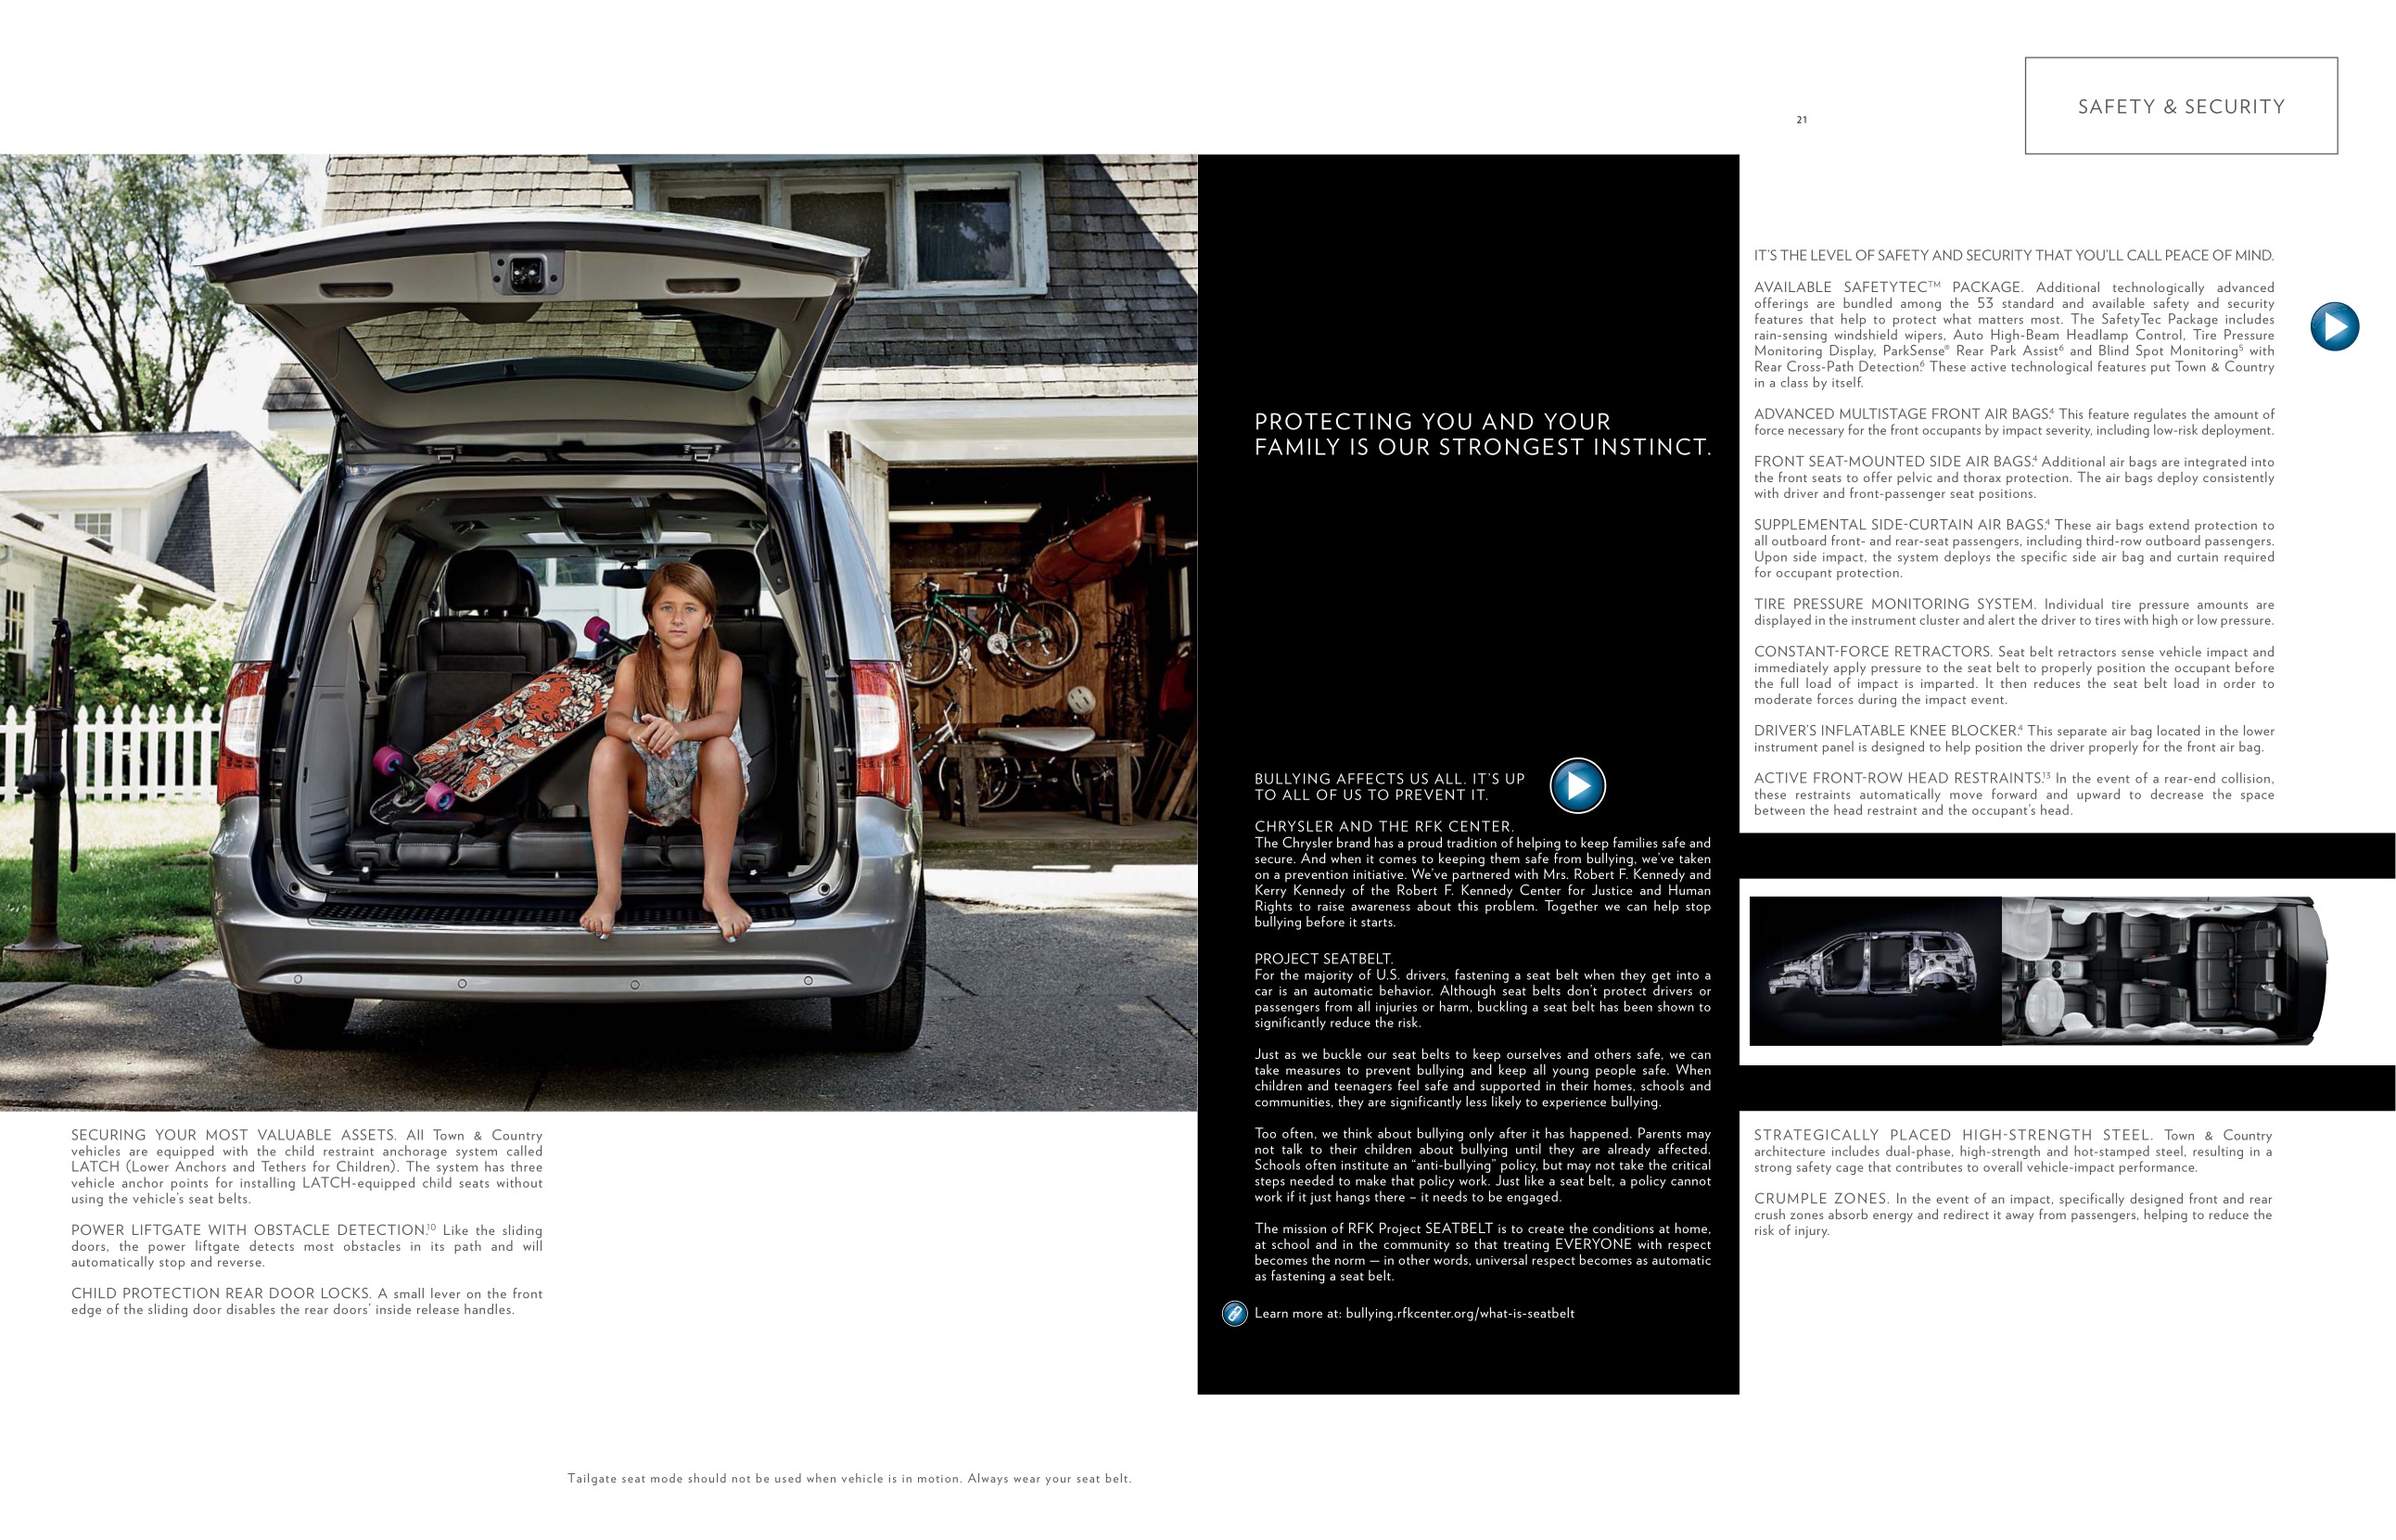 2015 Chrysler Town & Country Brochure Page 1